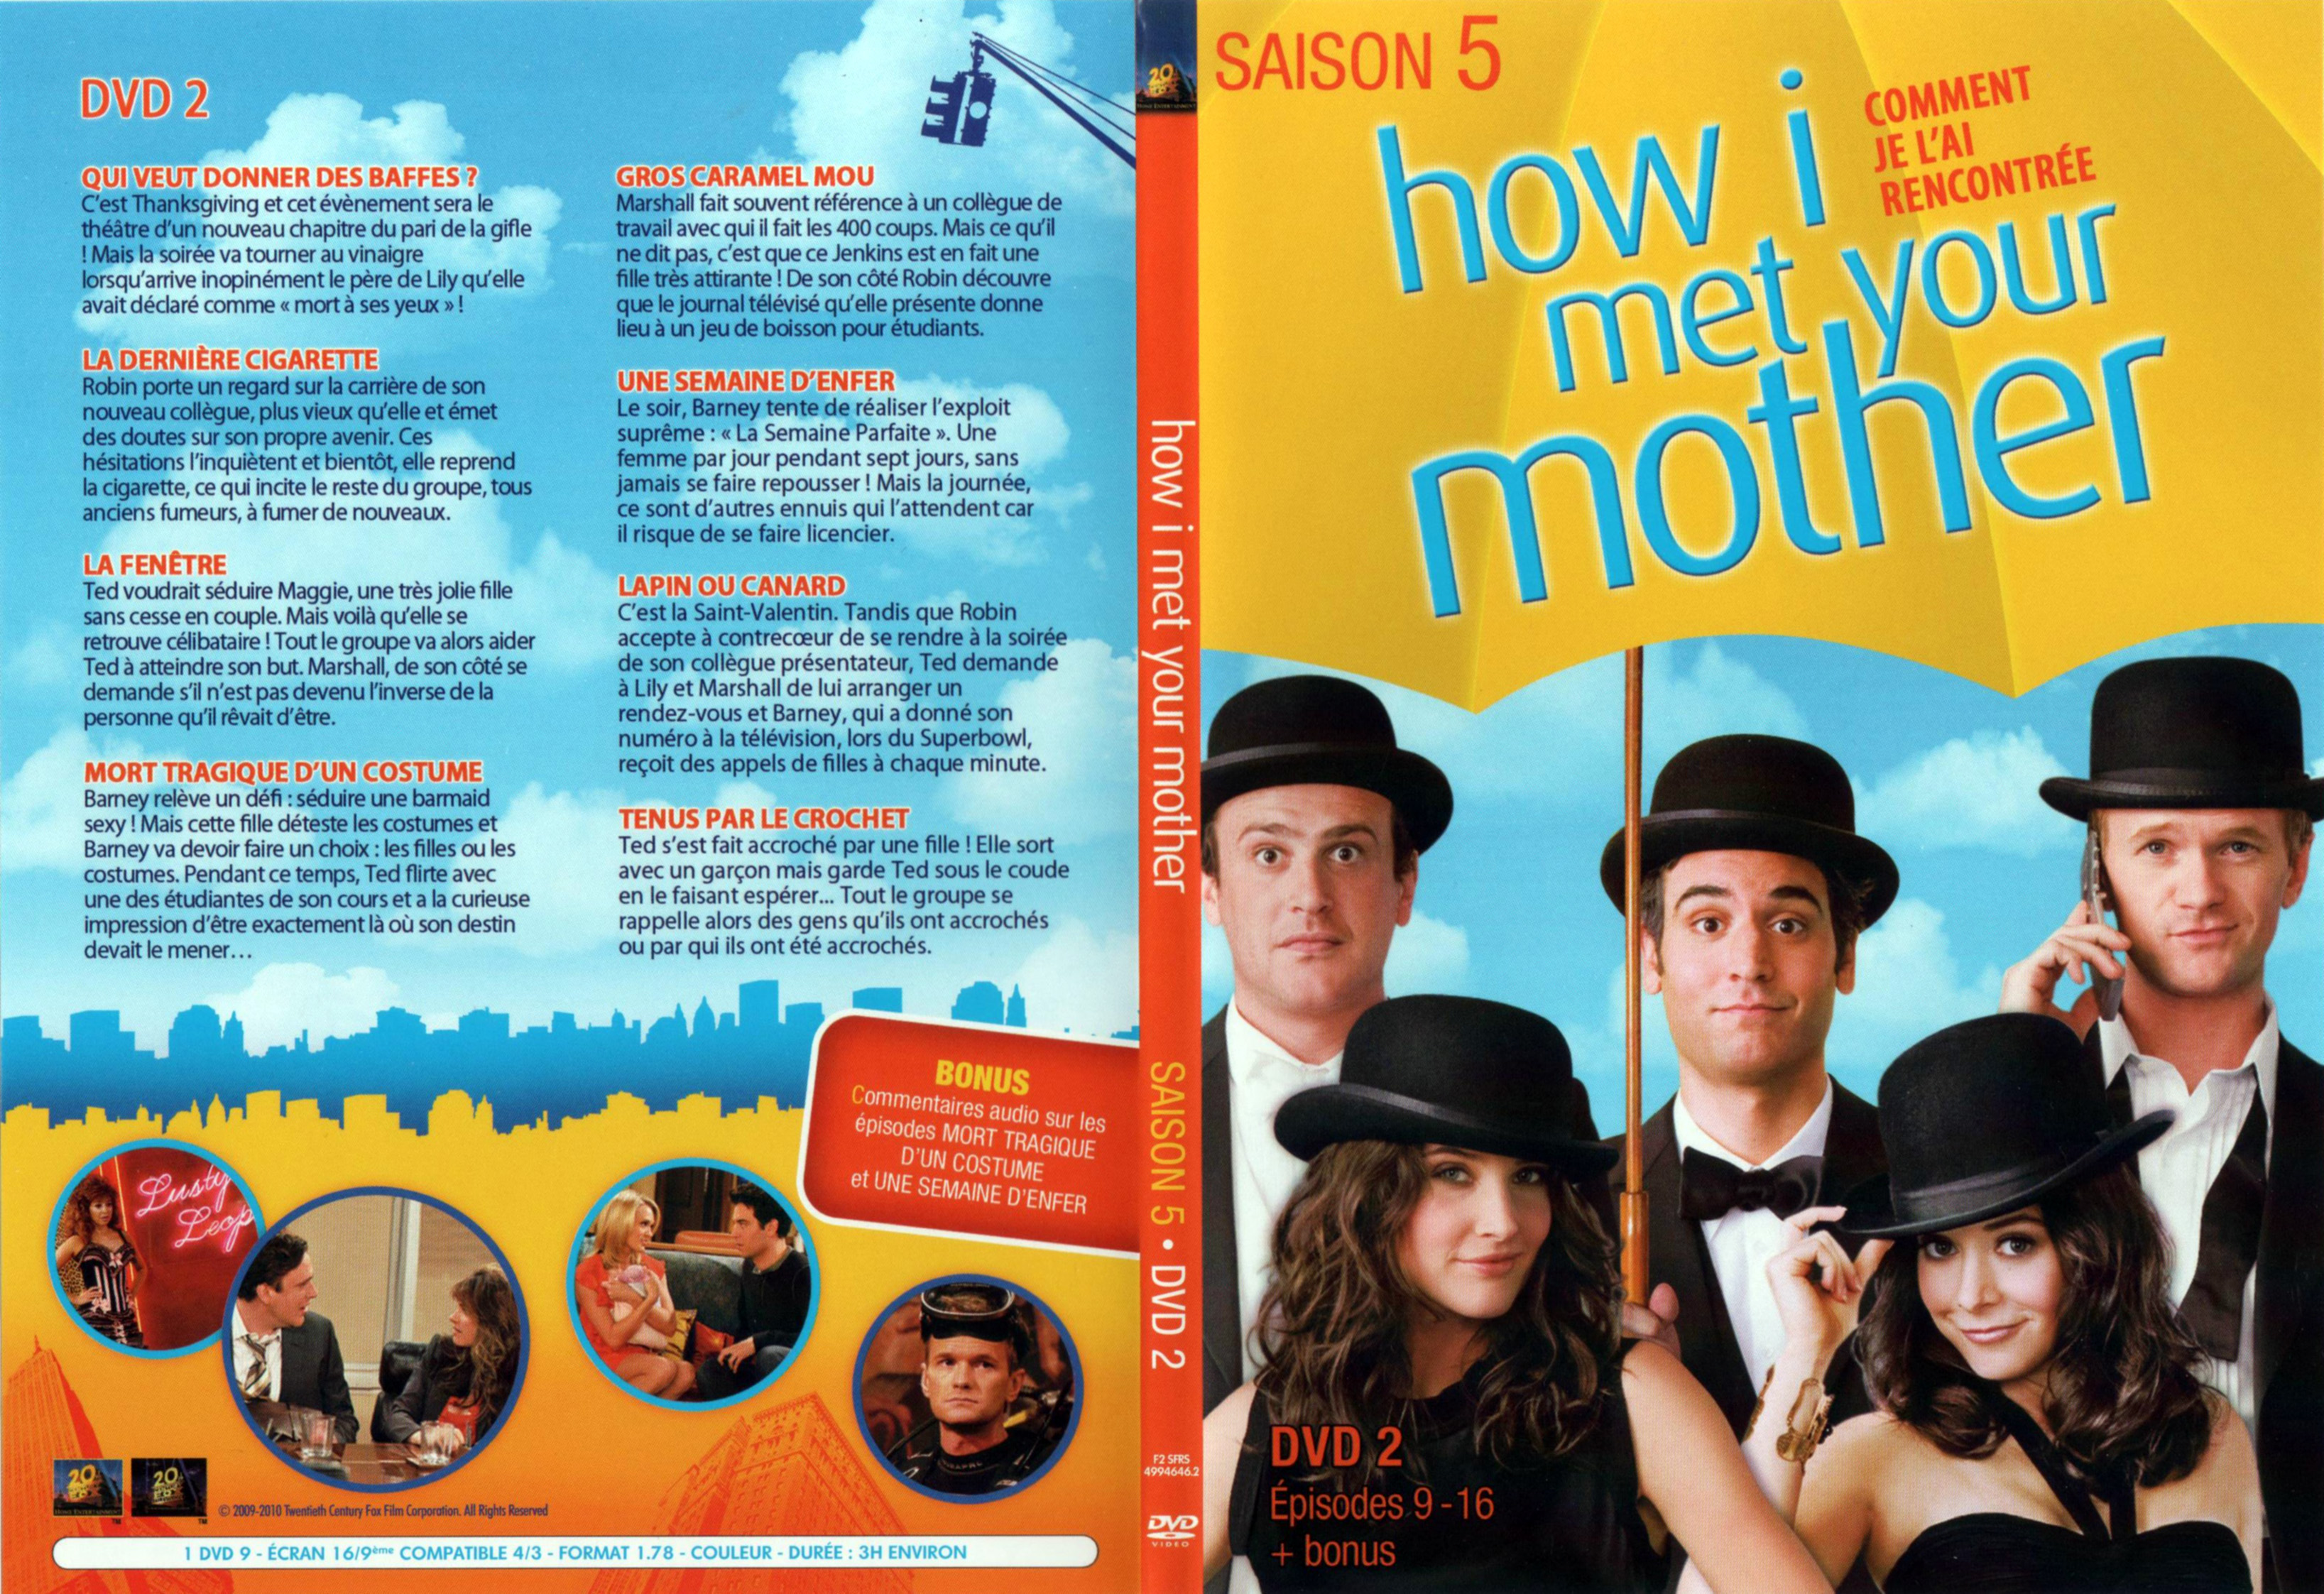 Jaquette DVD How i met your mother Saison 5 DVD 2